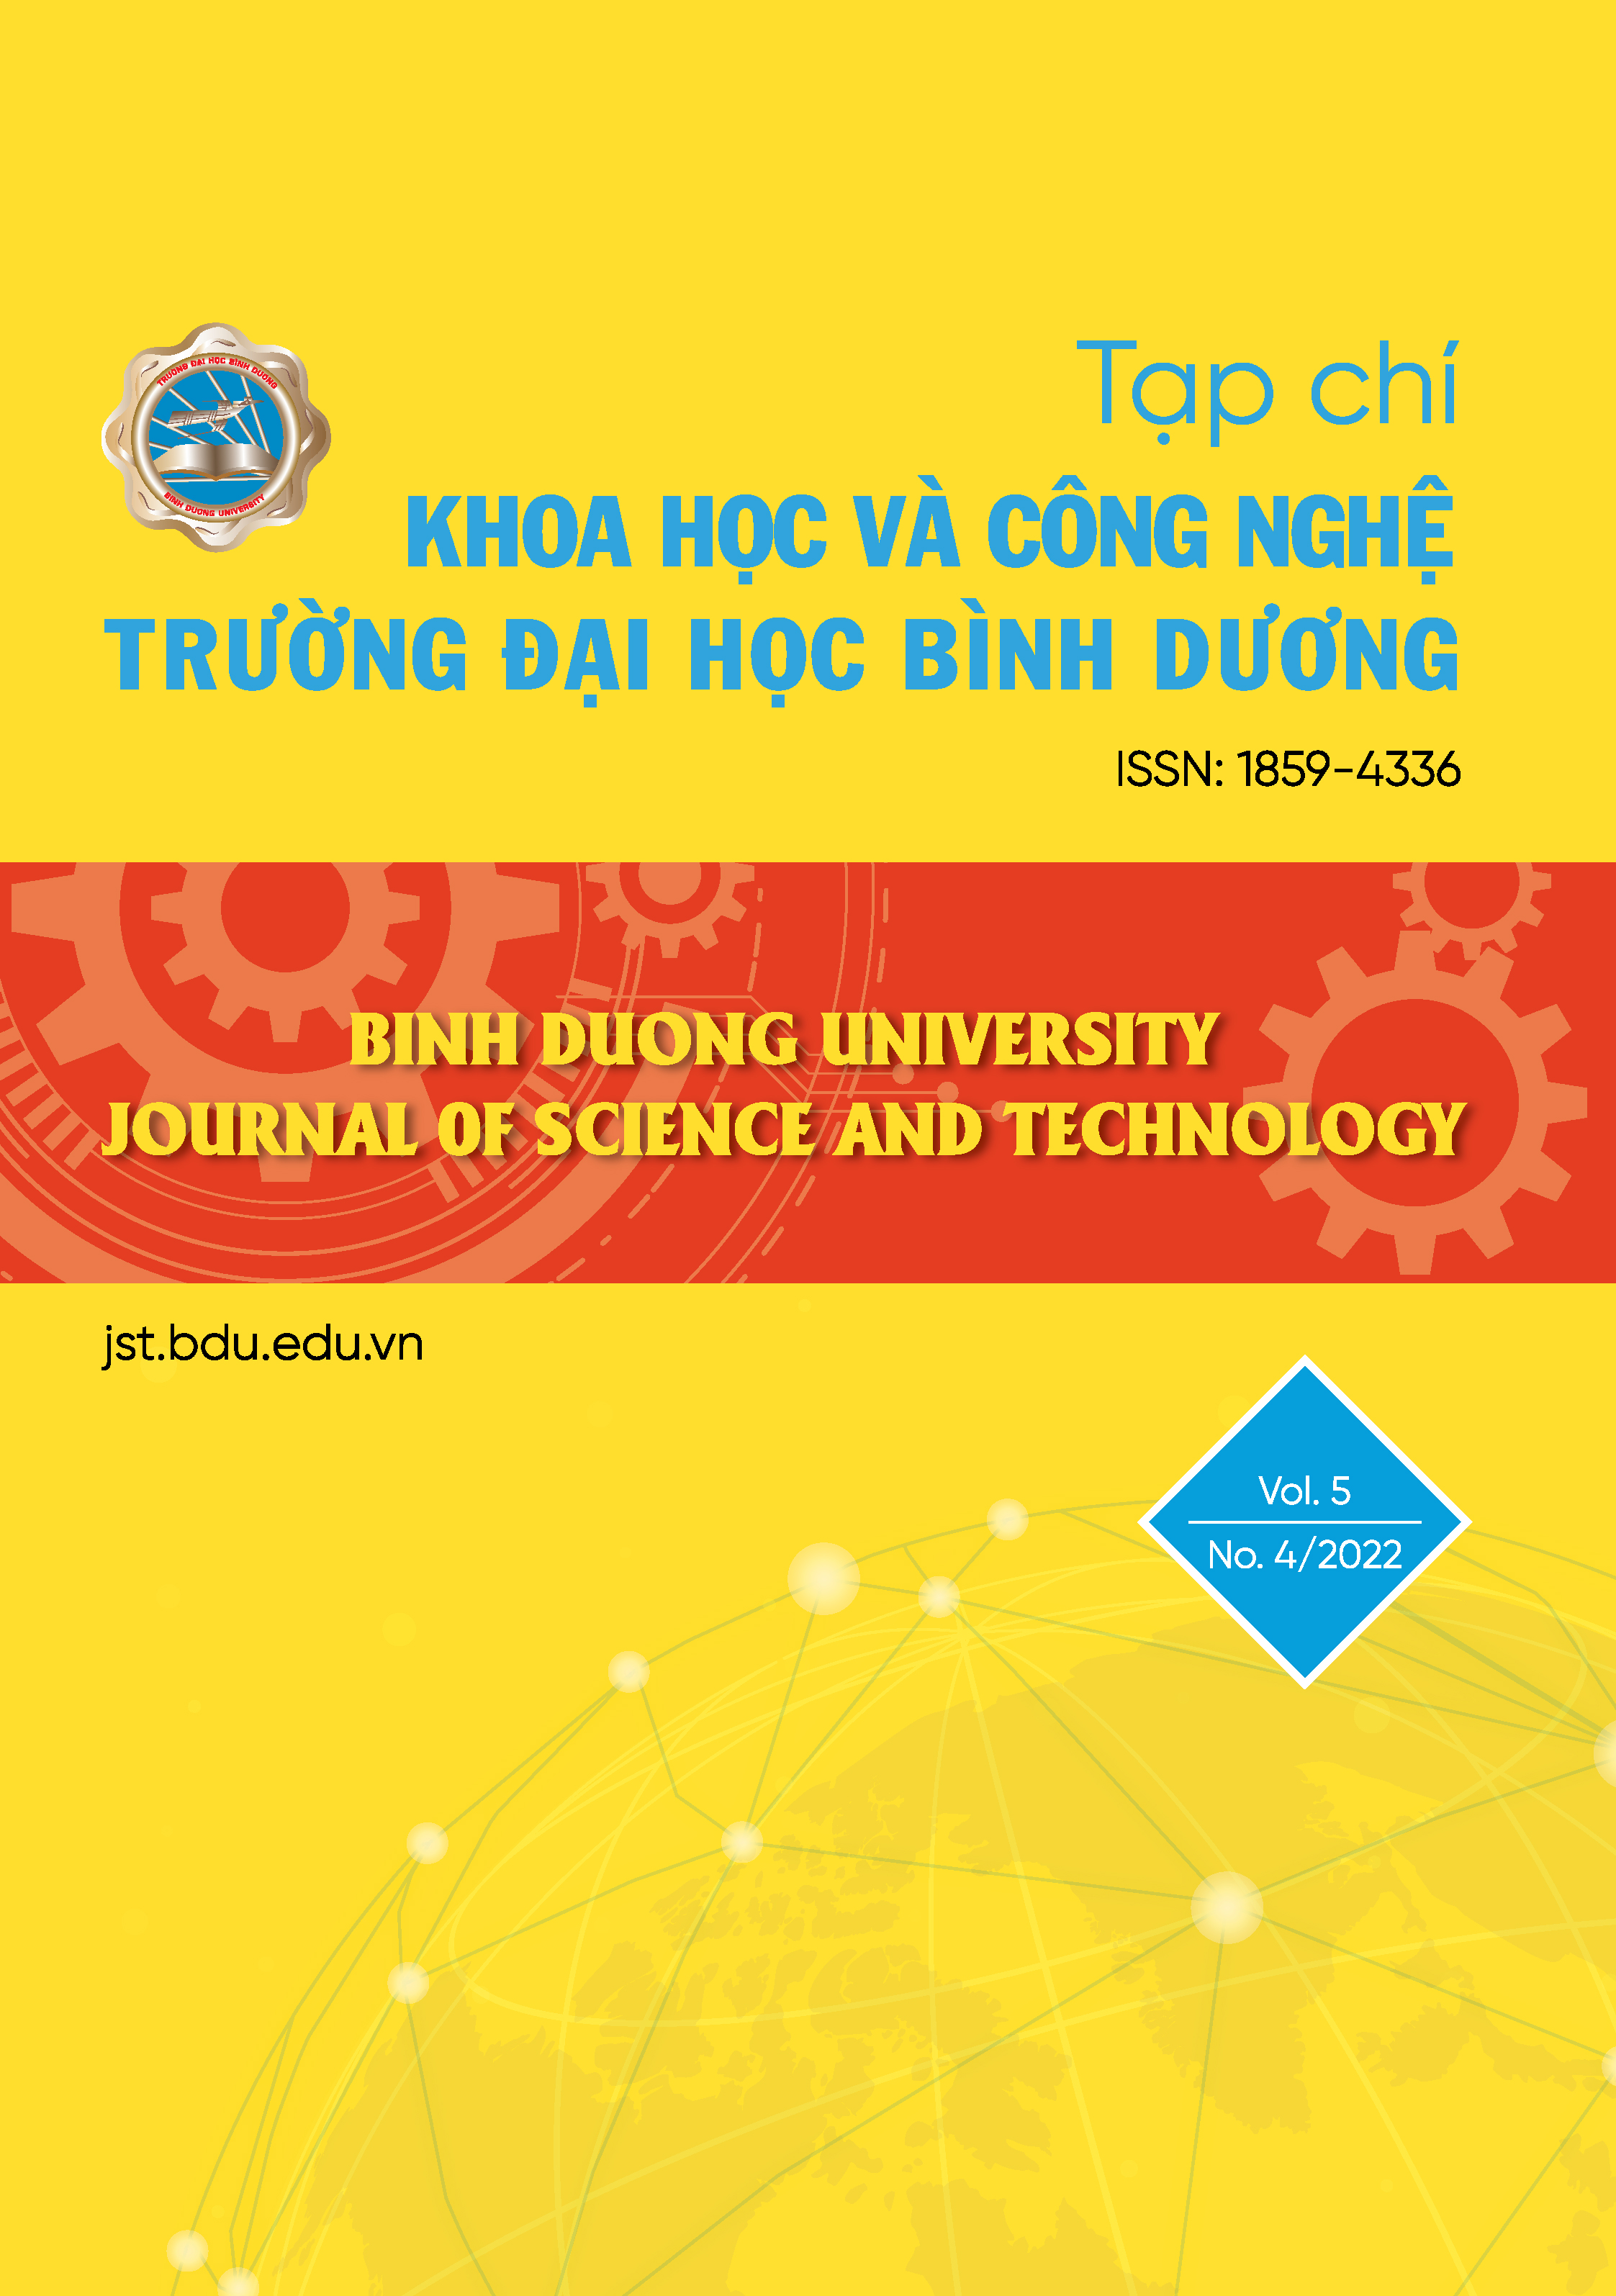 					View Vol. 5 No. 4 (2022): BINH DUONG UNIVERSITY JOURNAL OF SCIENCE AND TECHNOLOGY
				